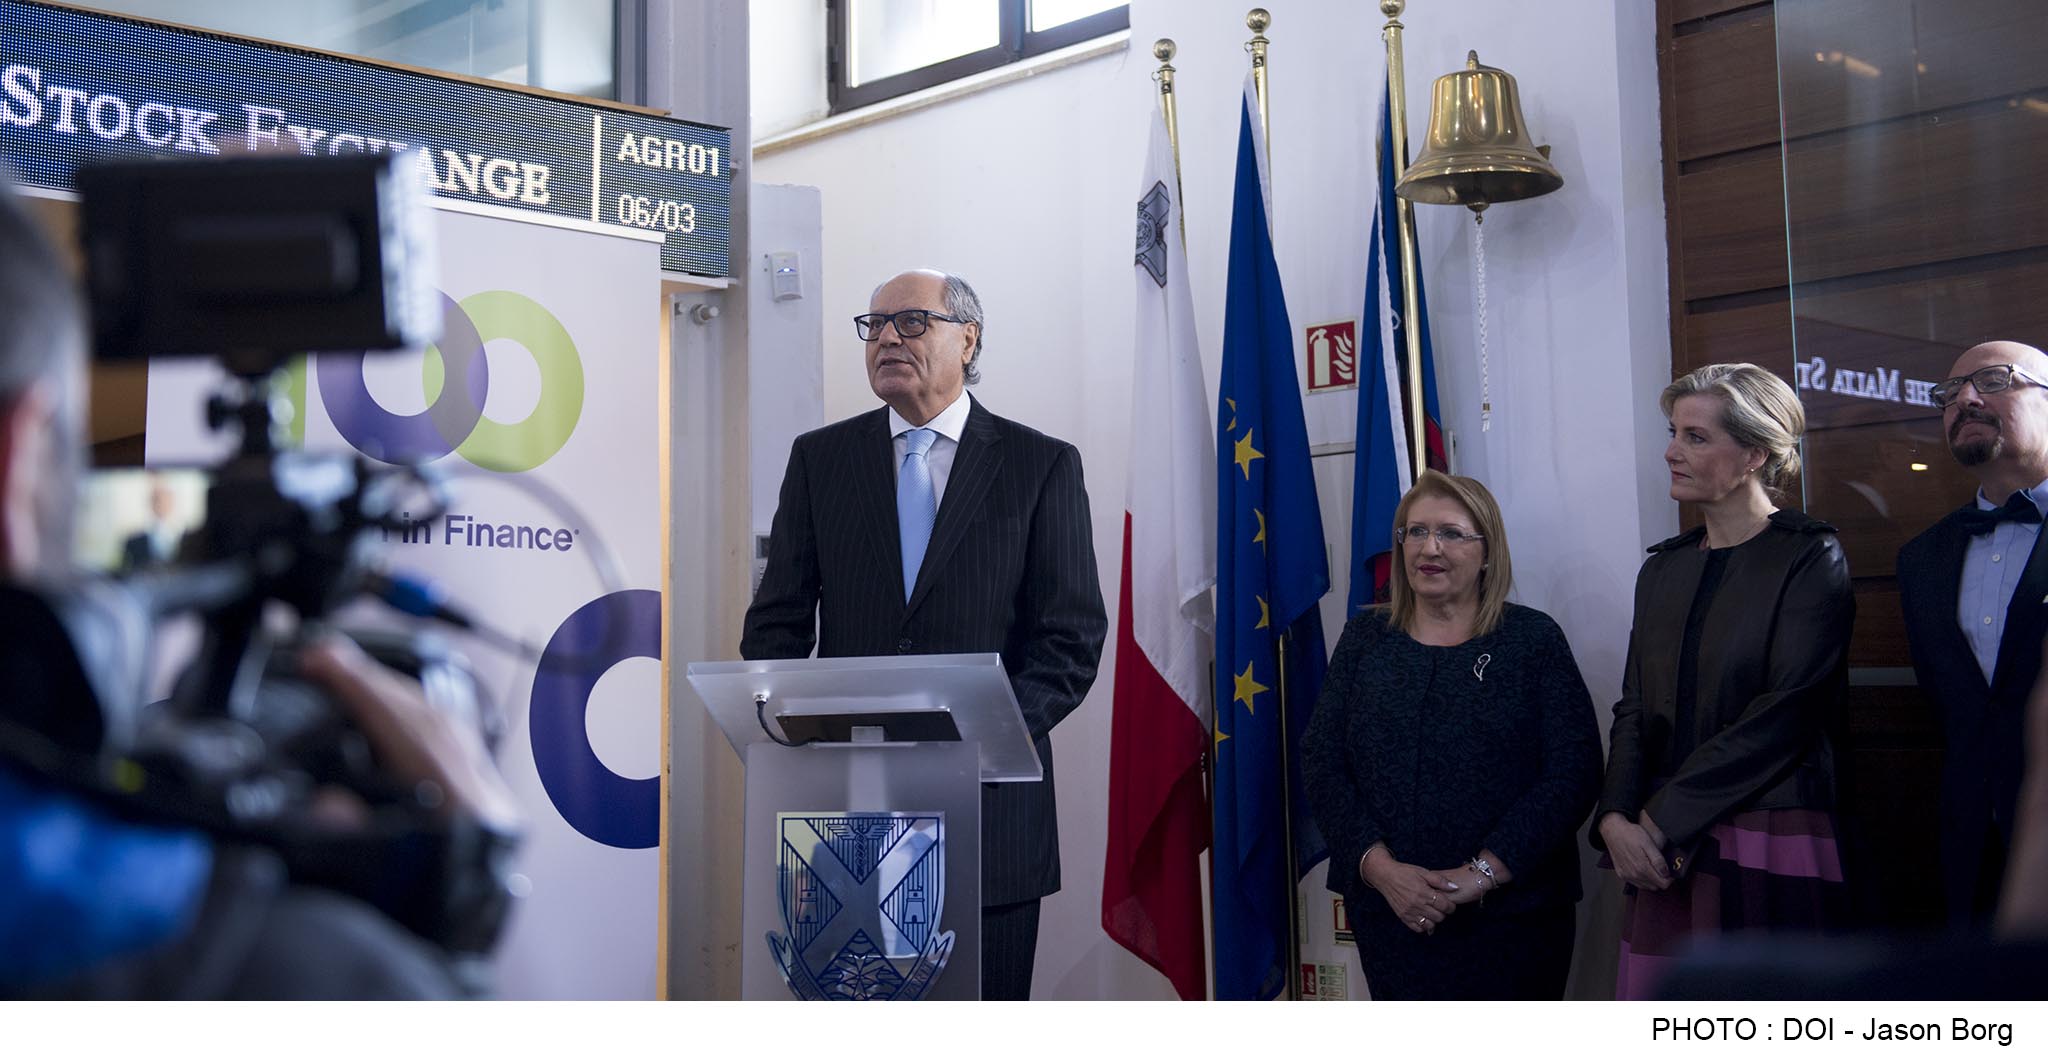 Women’s Day celebrated at the Malta Stock Exchange in the presence of the Countess of Wessex